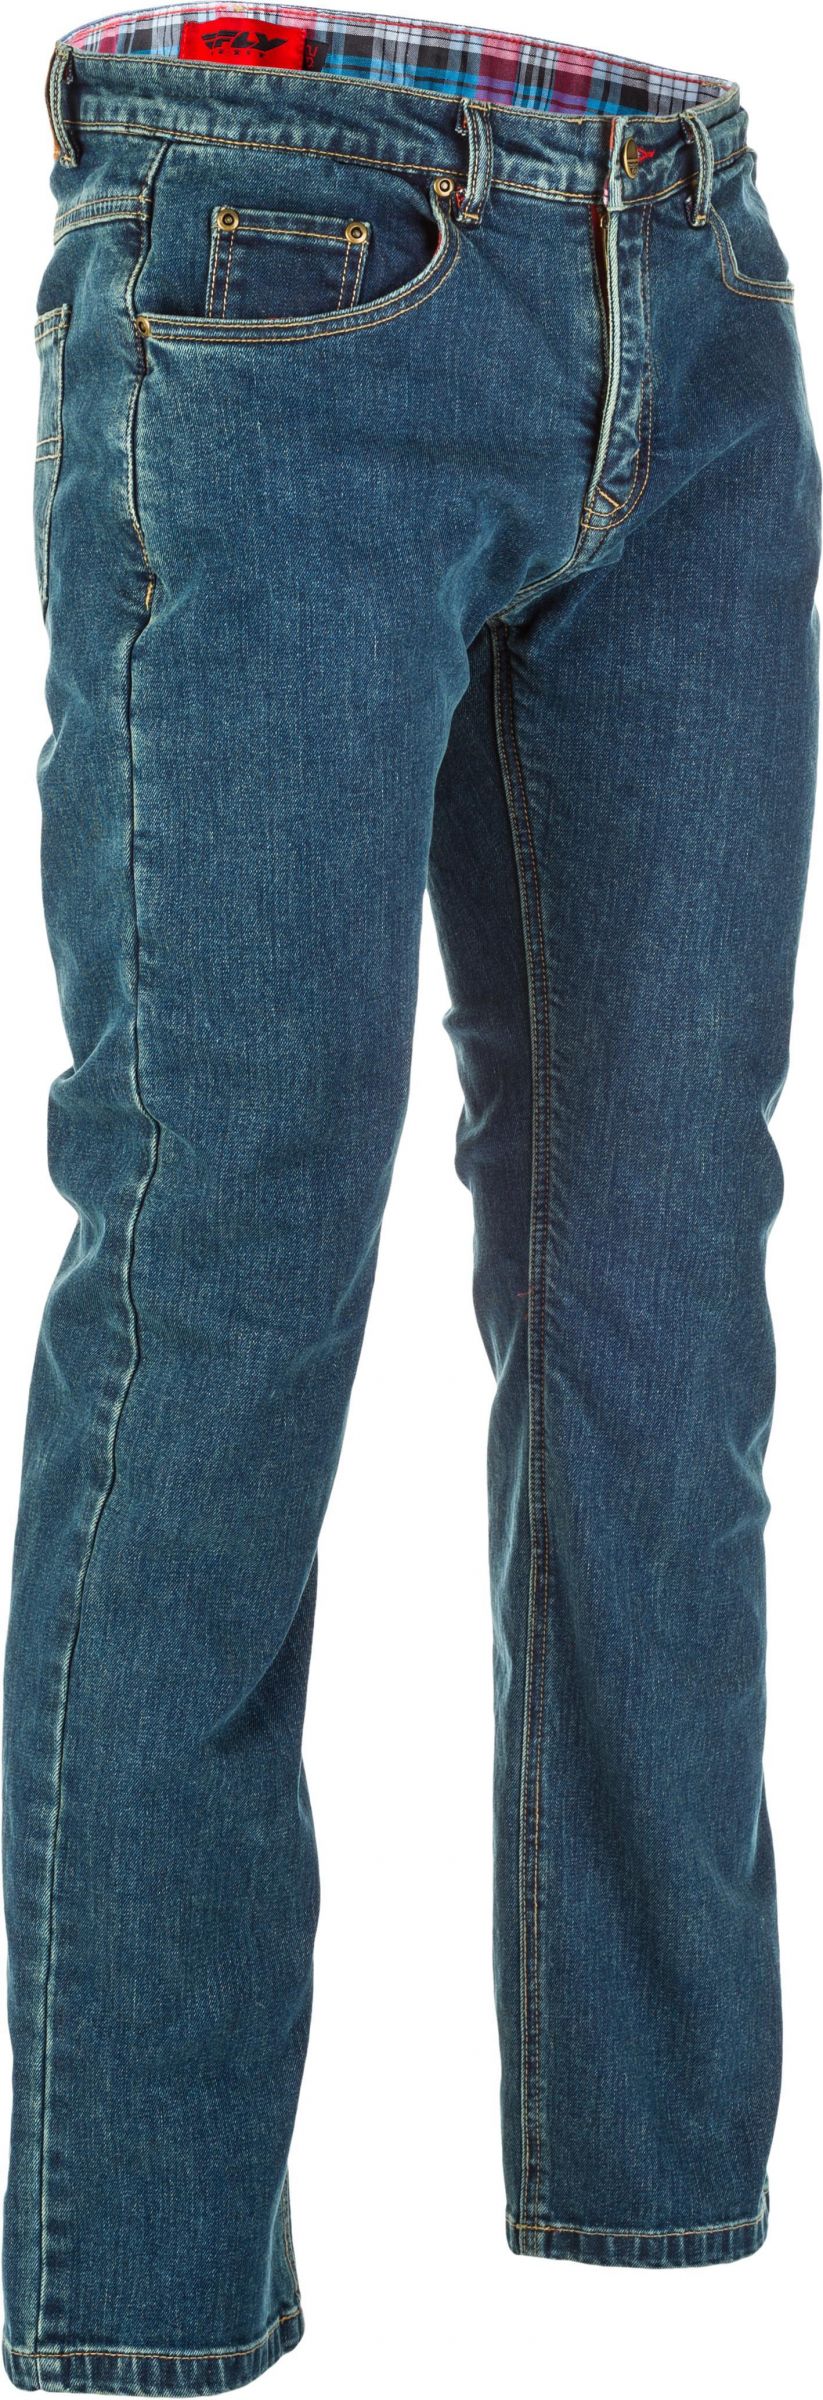 8RQW-FLY-RA-6049-478-30440 Resistance Jeans